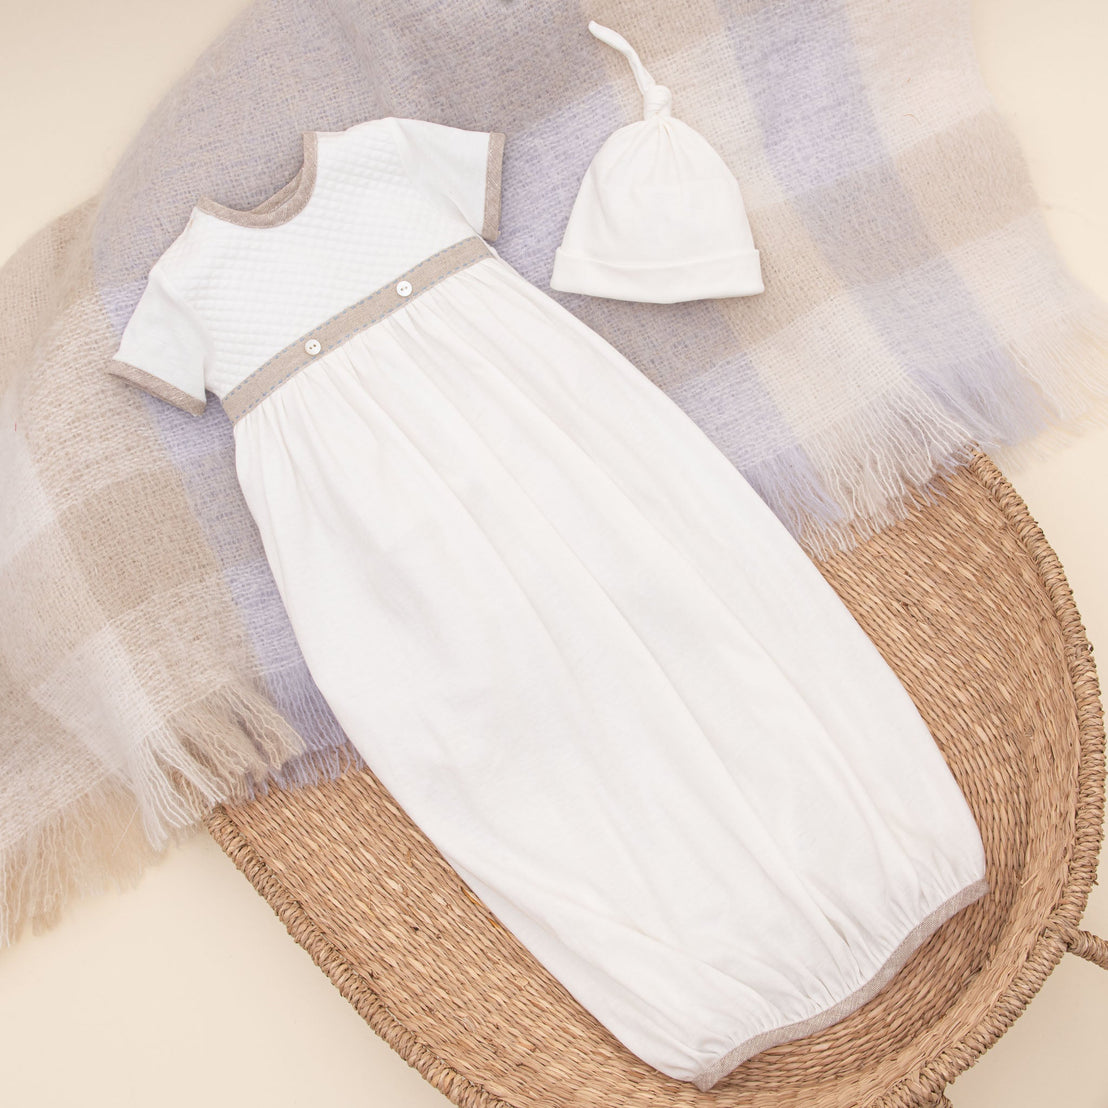 An Austin Layette & Hat, an heirloom-quality white gown with a textured upper bodice and grey details, is elegantly laid out on a wicker basket with a beige blanket and a matching.